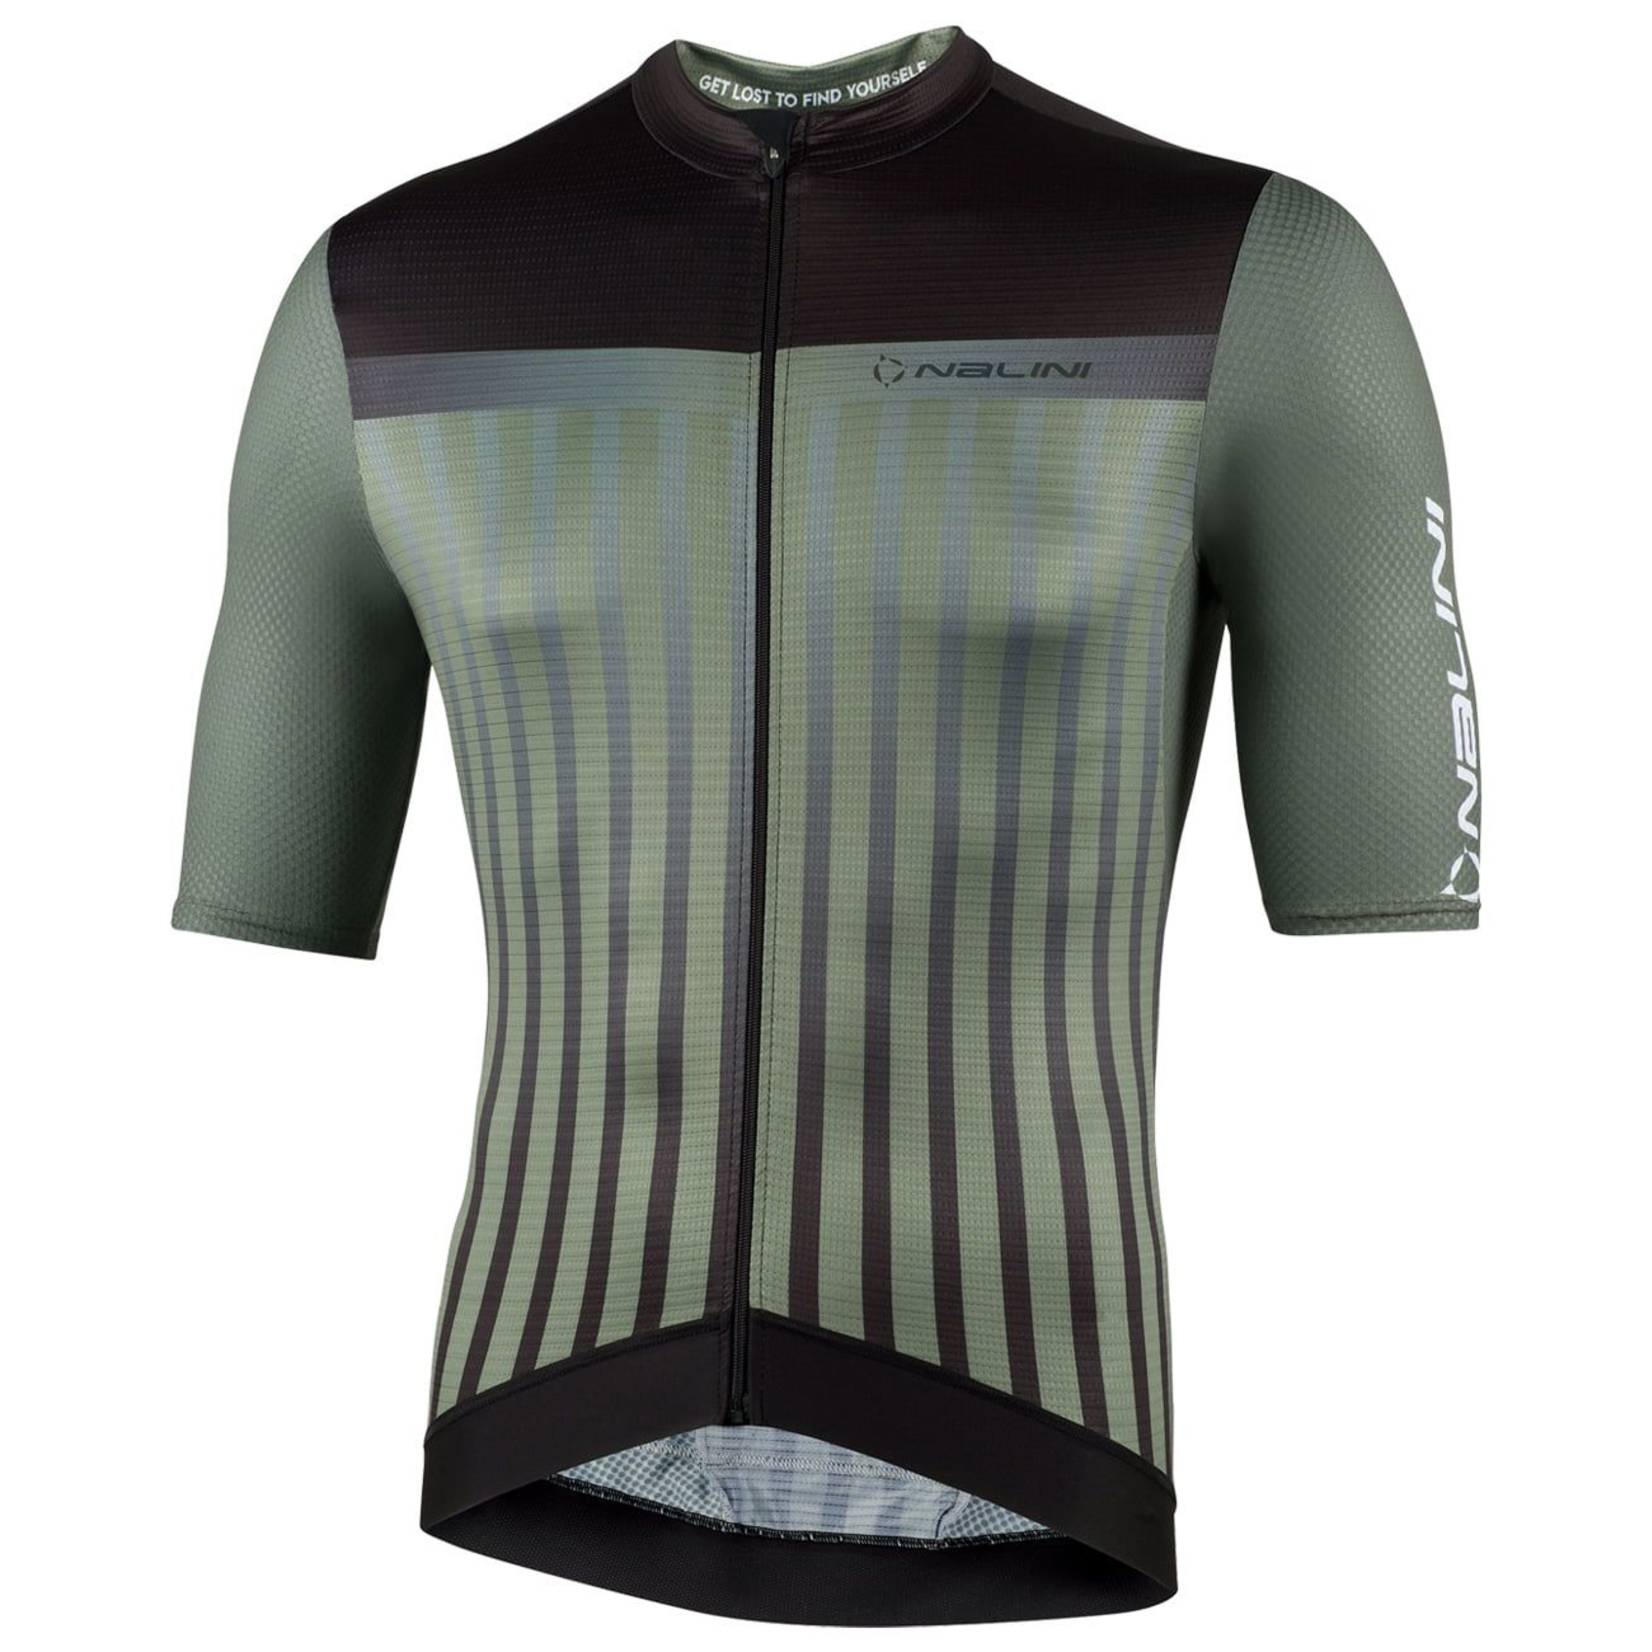 Maillot à Manches Courtes Nalini New Respect Jersey Black/Olive Green XL